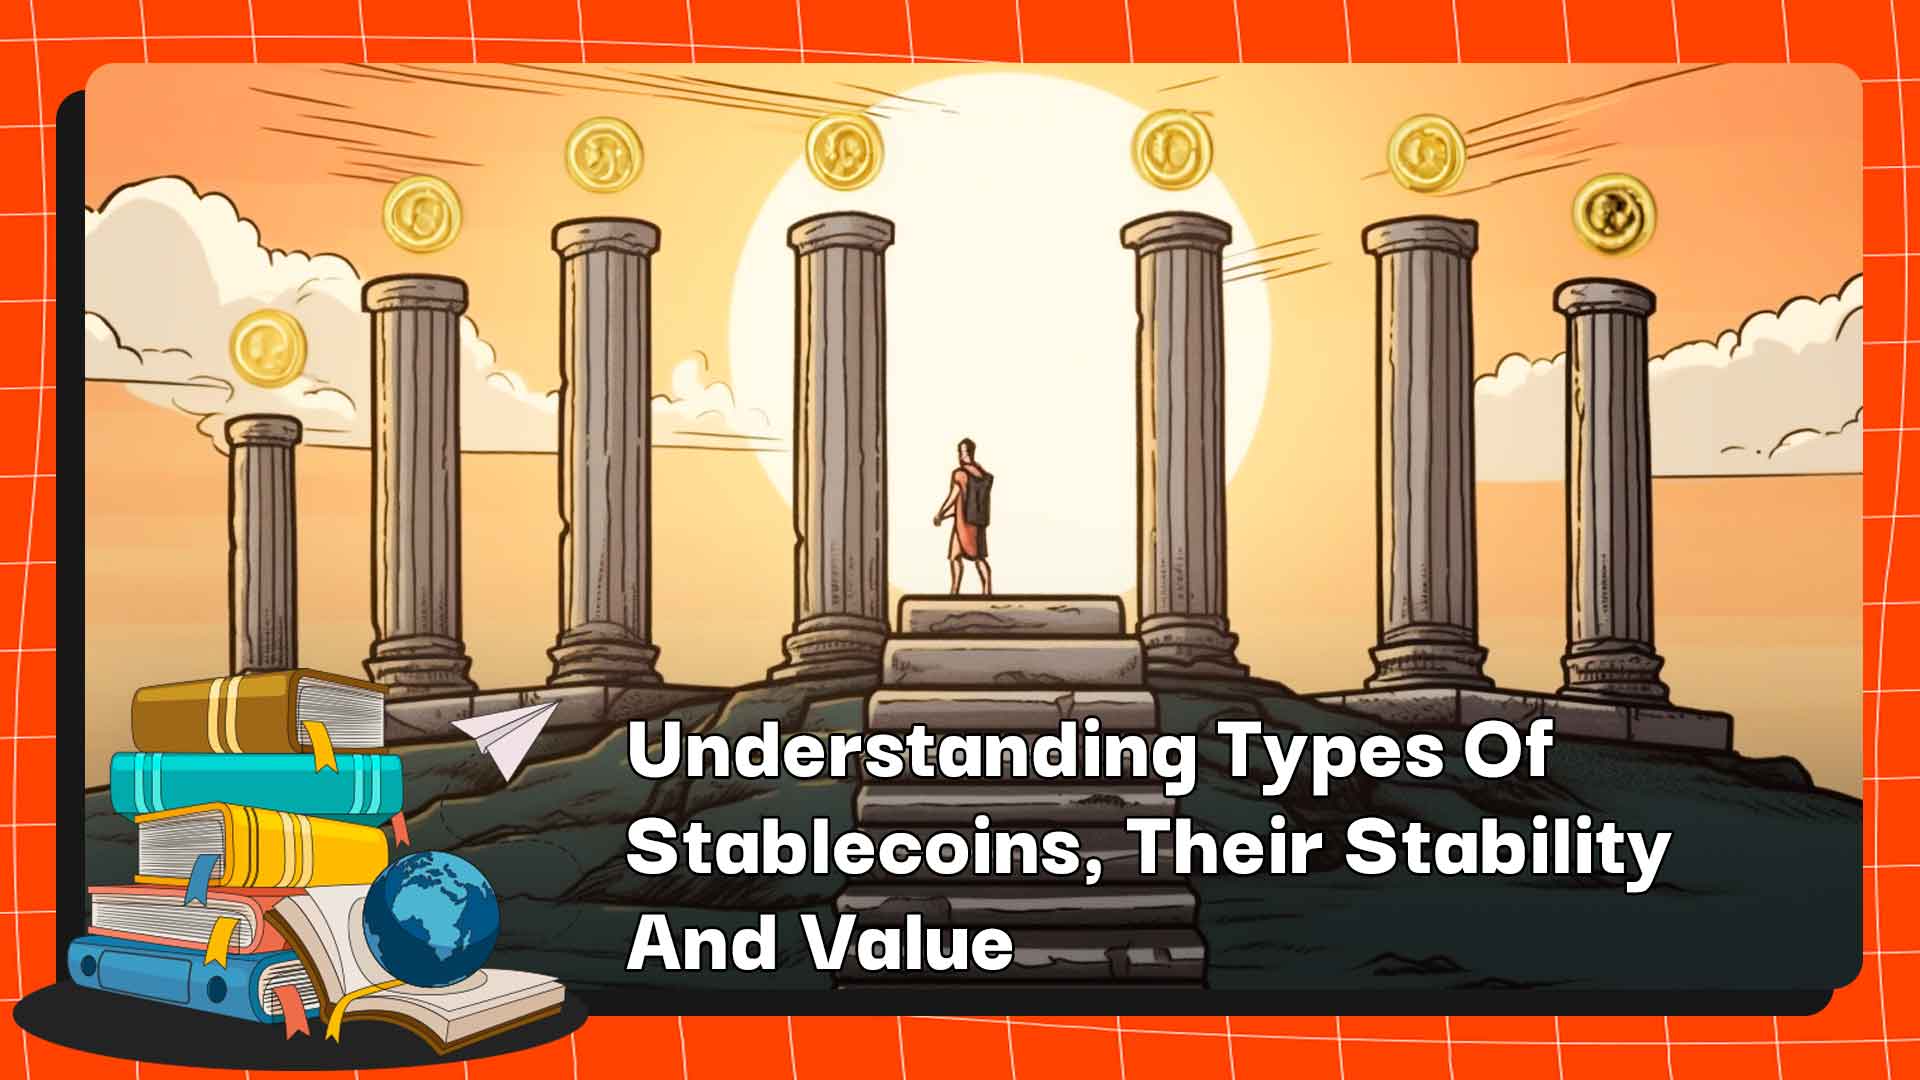 Understanding Types Of Stablecoins, Their Stability And Value